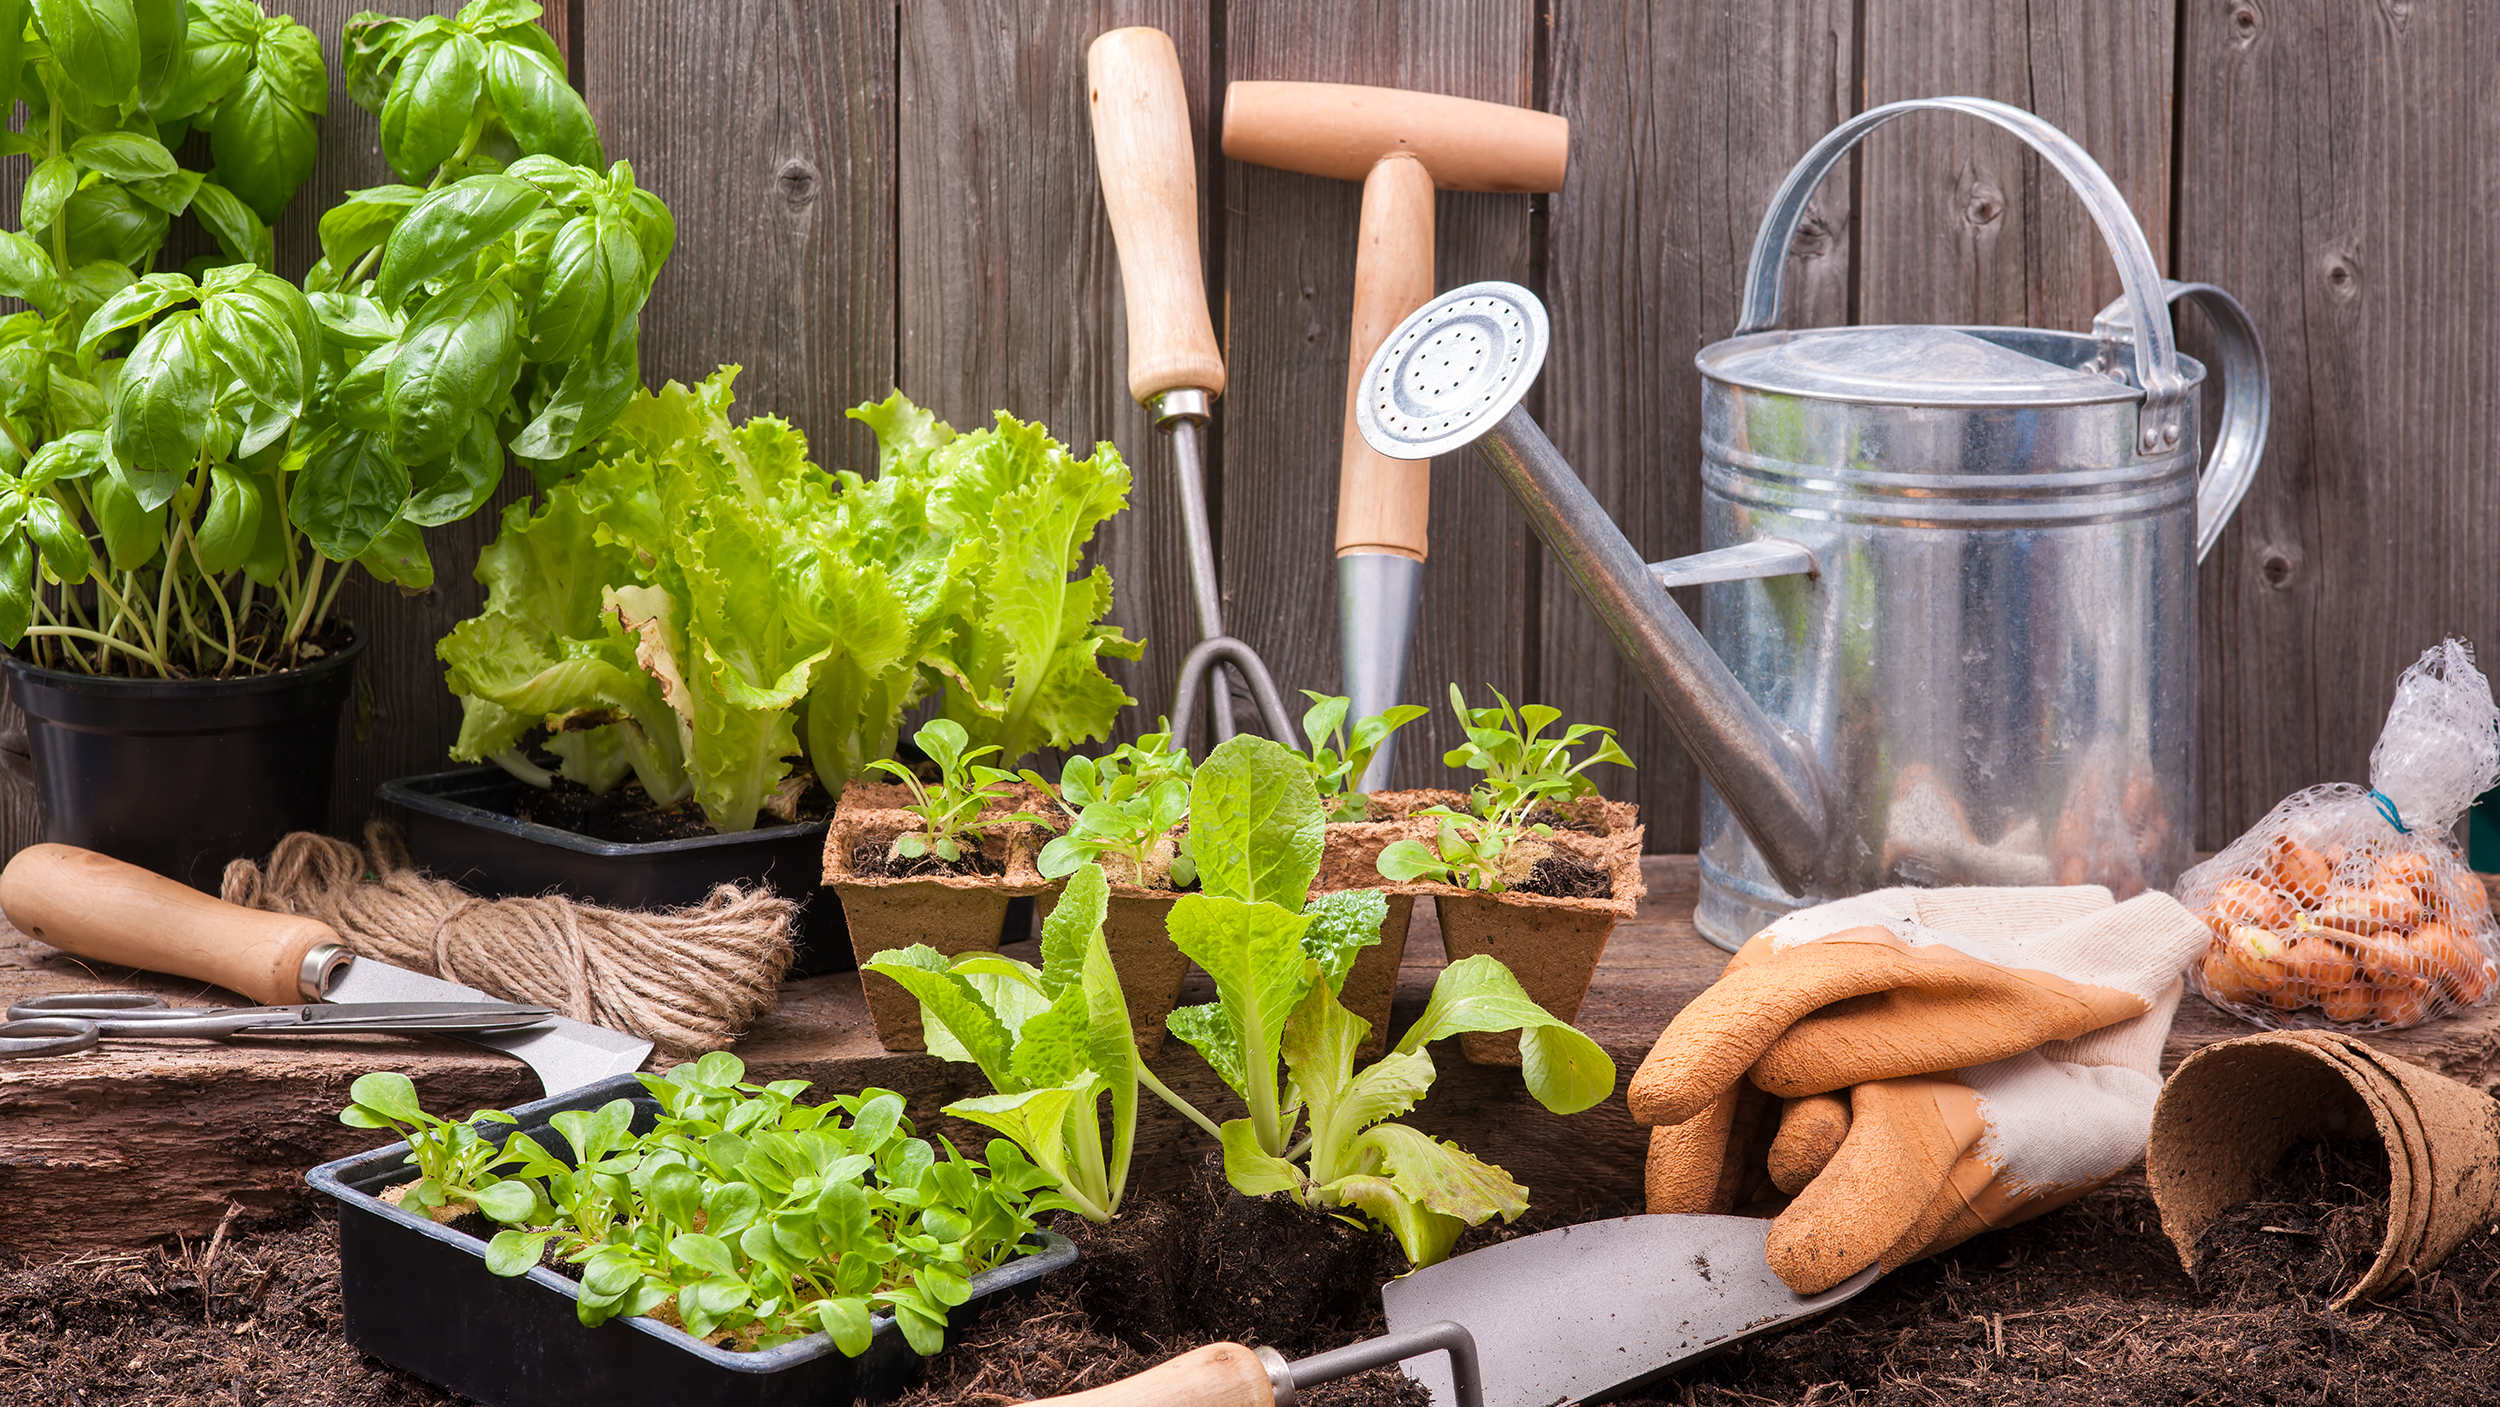 Gardening tips: 3 things to know when planting